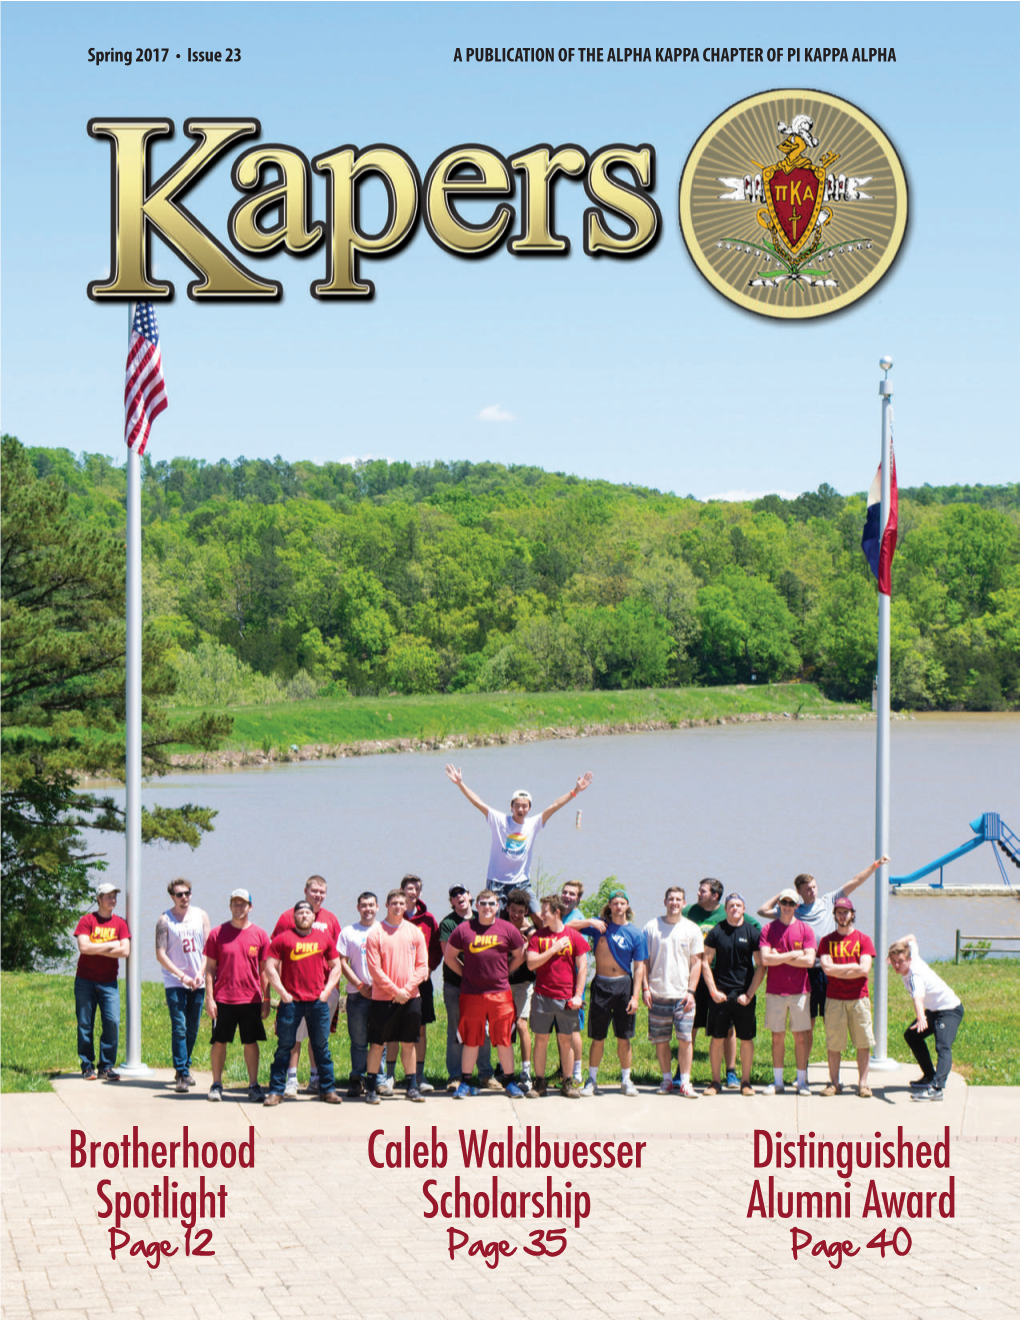 Spring 2017 • Issue 23 a PUBLICATION of the ALPHA KAPPA CHAPTER of PI KAPPA ALPHA